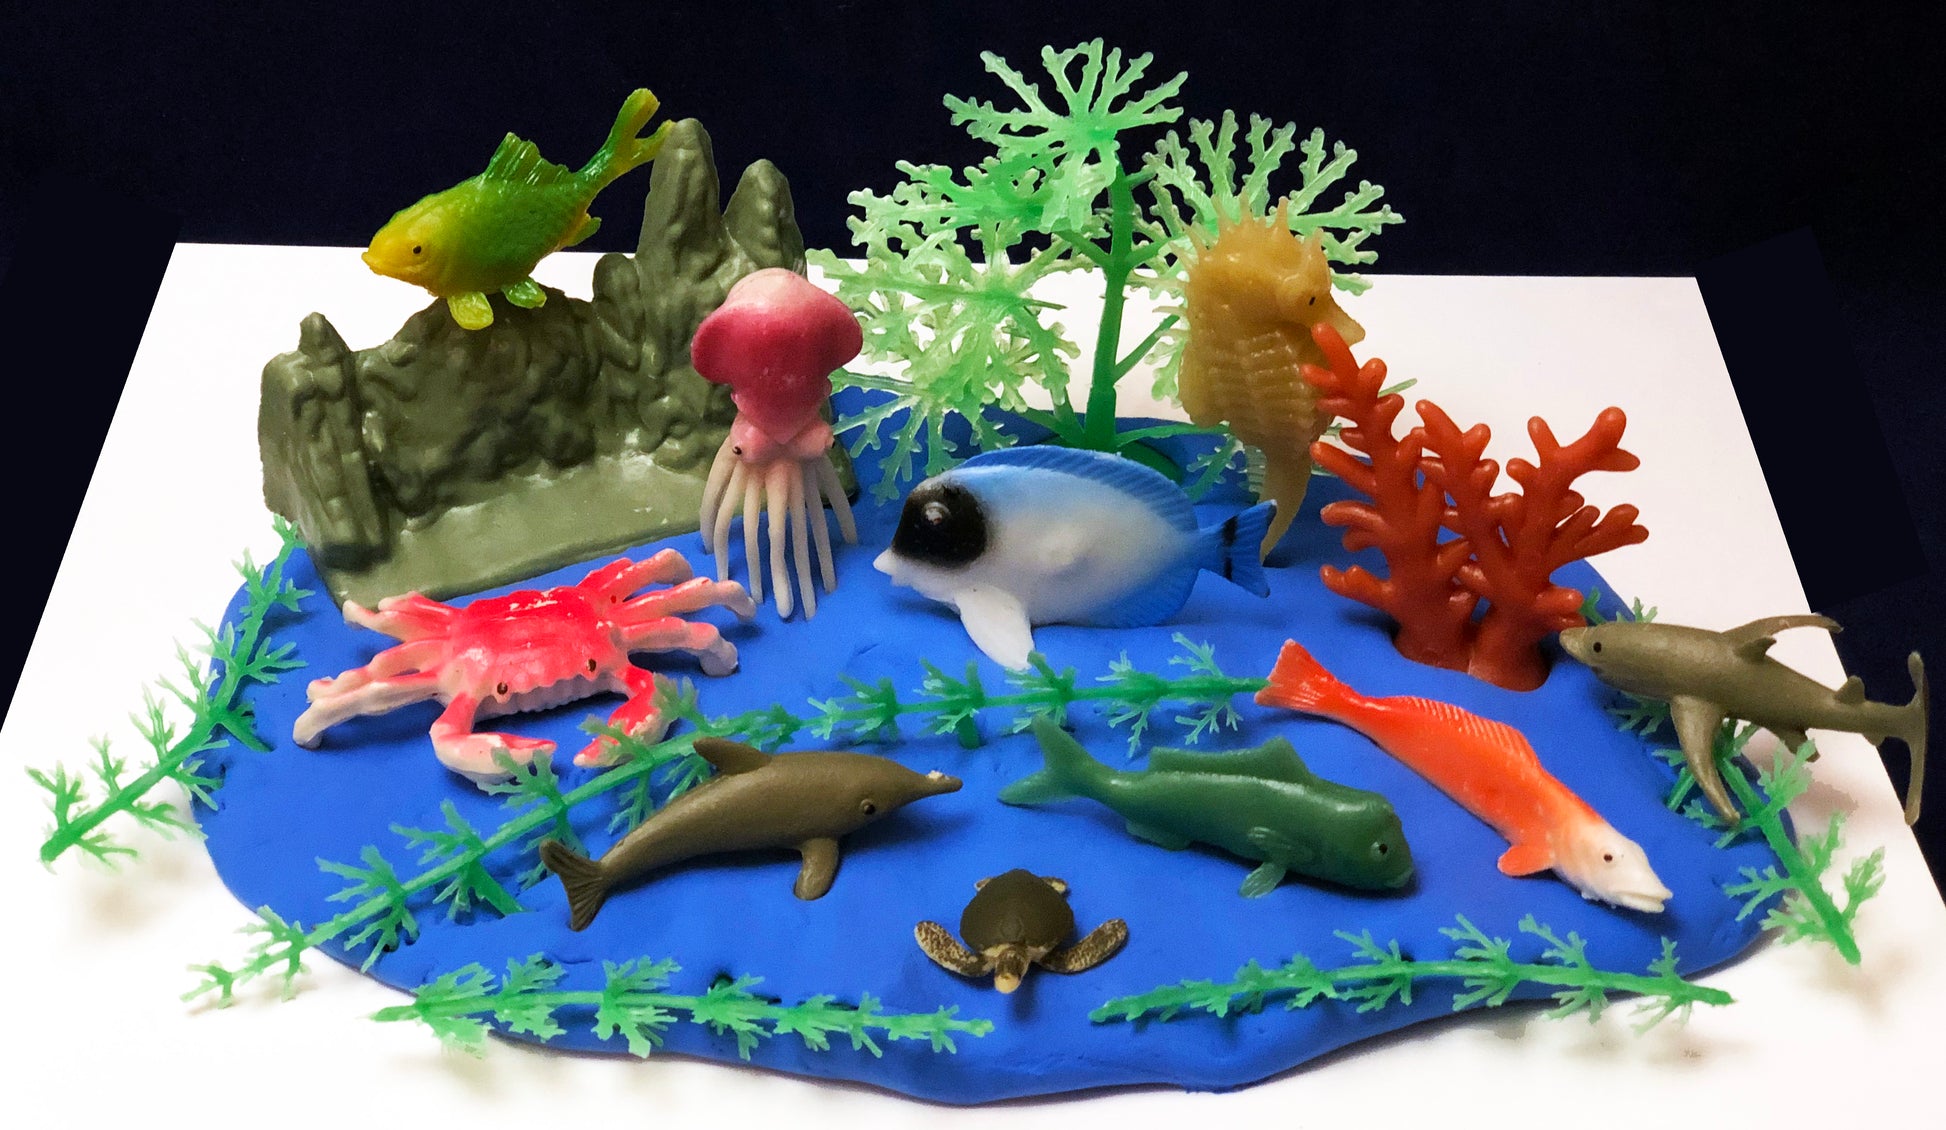 Make your own coral reef with clay and sea creatures